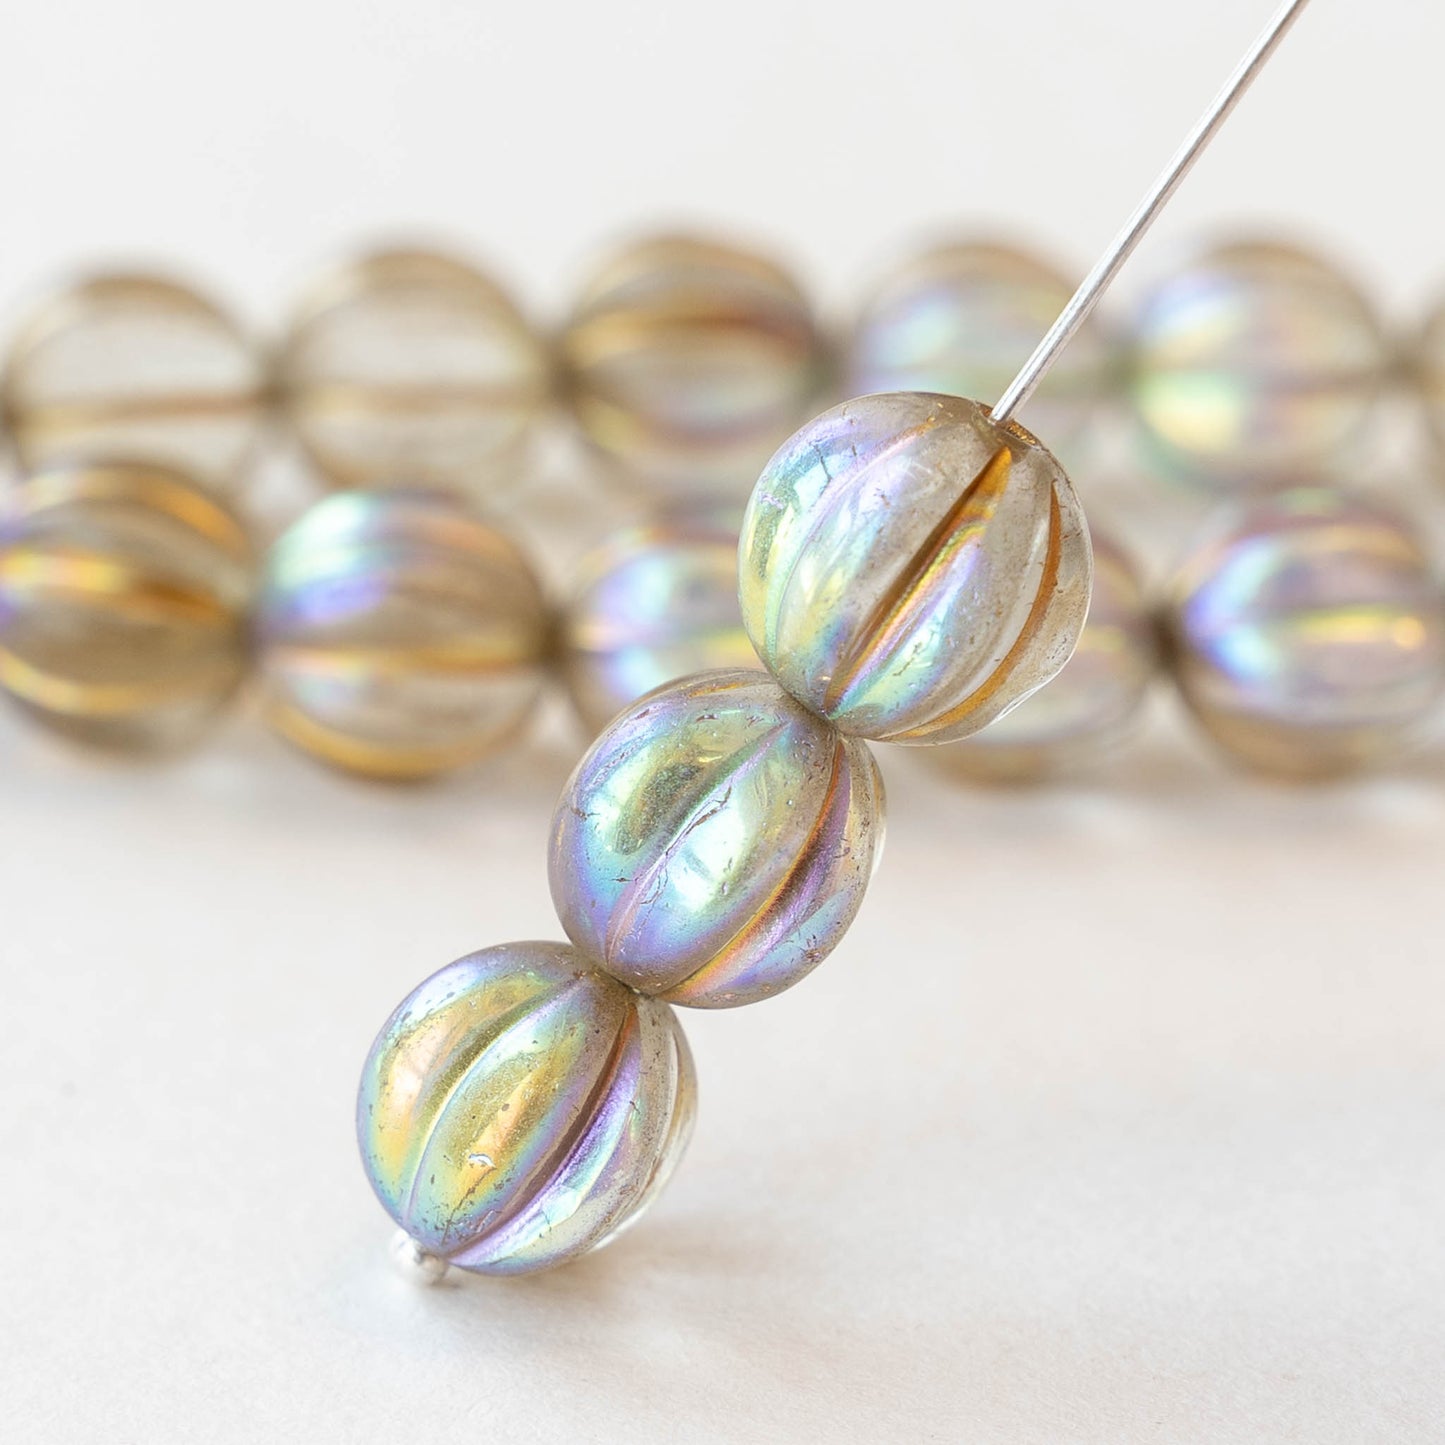 10mm Melon Beads -  Transparent AB Finish with Gold Wash  - 15 Beads